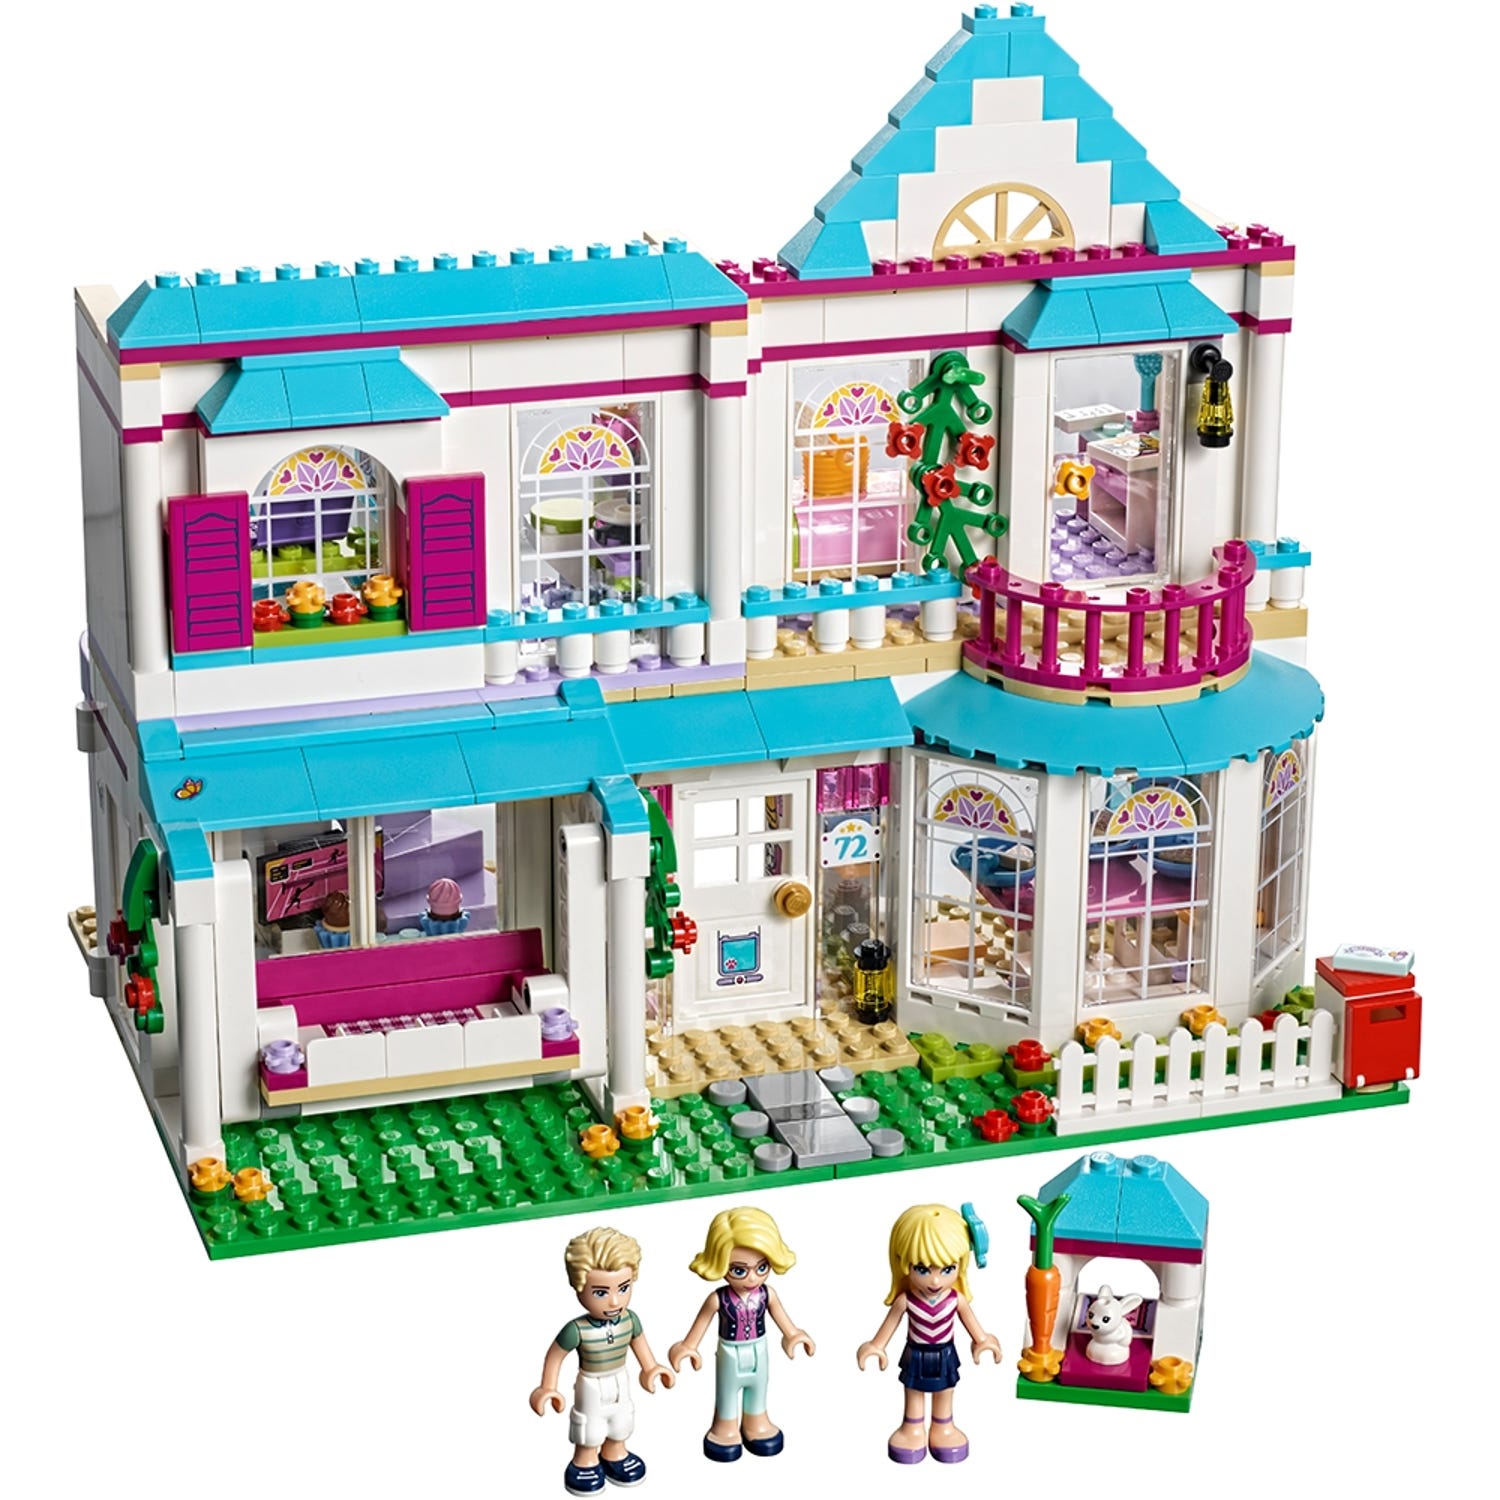 Stephanie's House 41314 | Friends | Buy online at the Official LEGO® Shop US